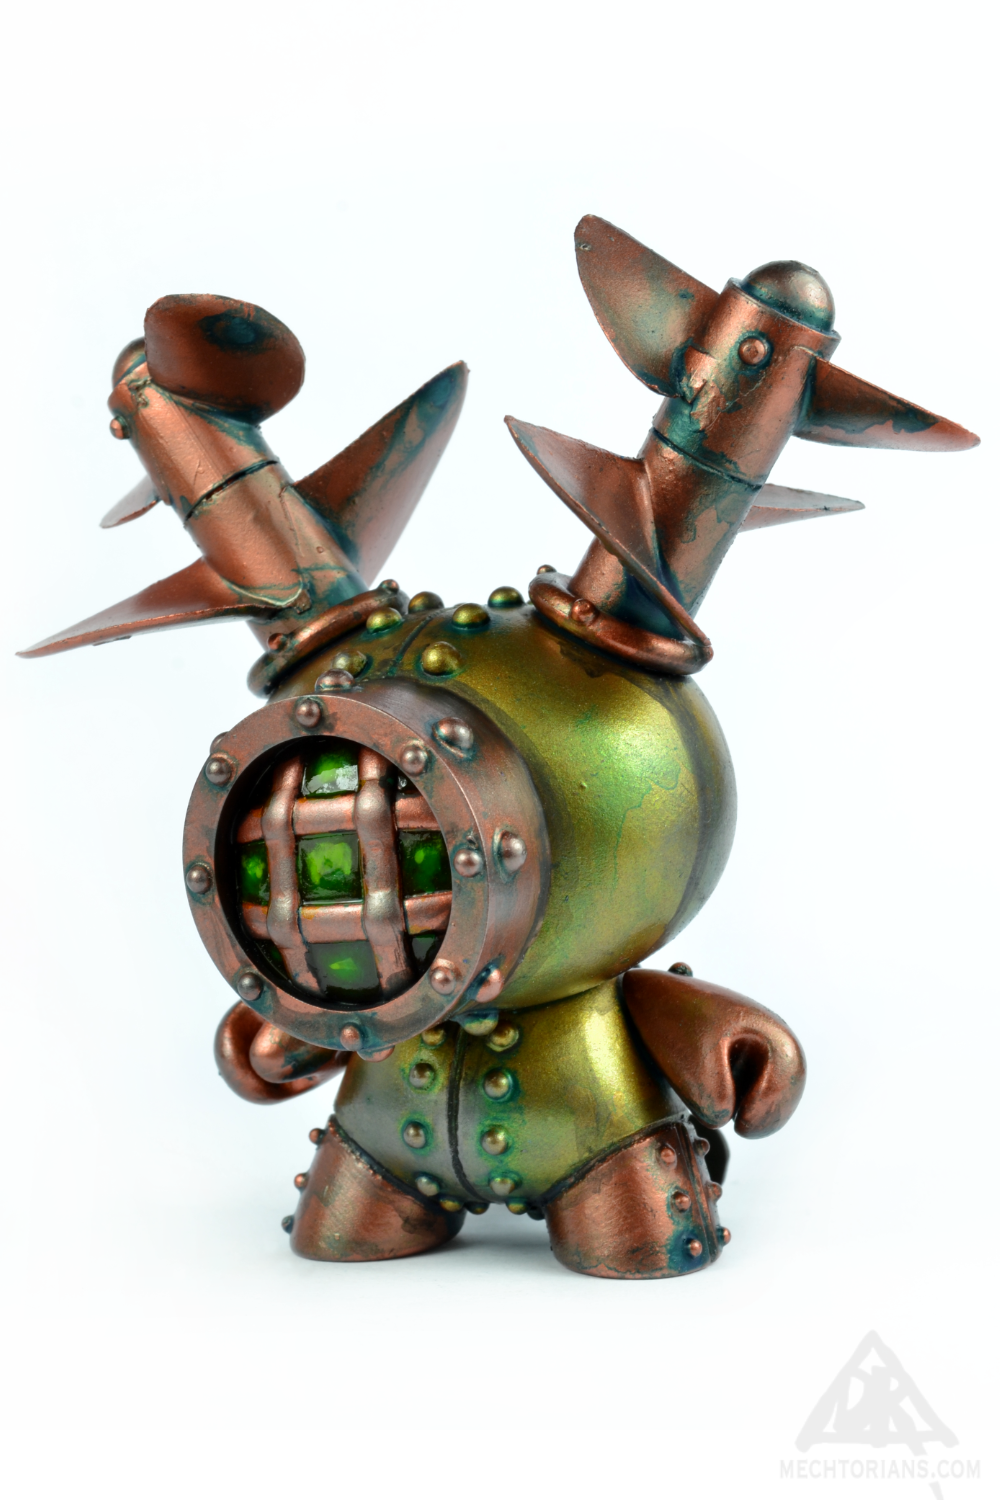 The Submariner. A submarine based Mechtorian Customised 3" Dunny by Doktor A. Bruce Whistlecraft.